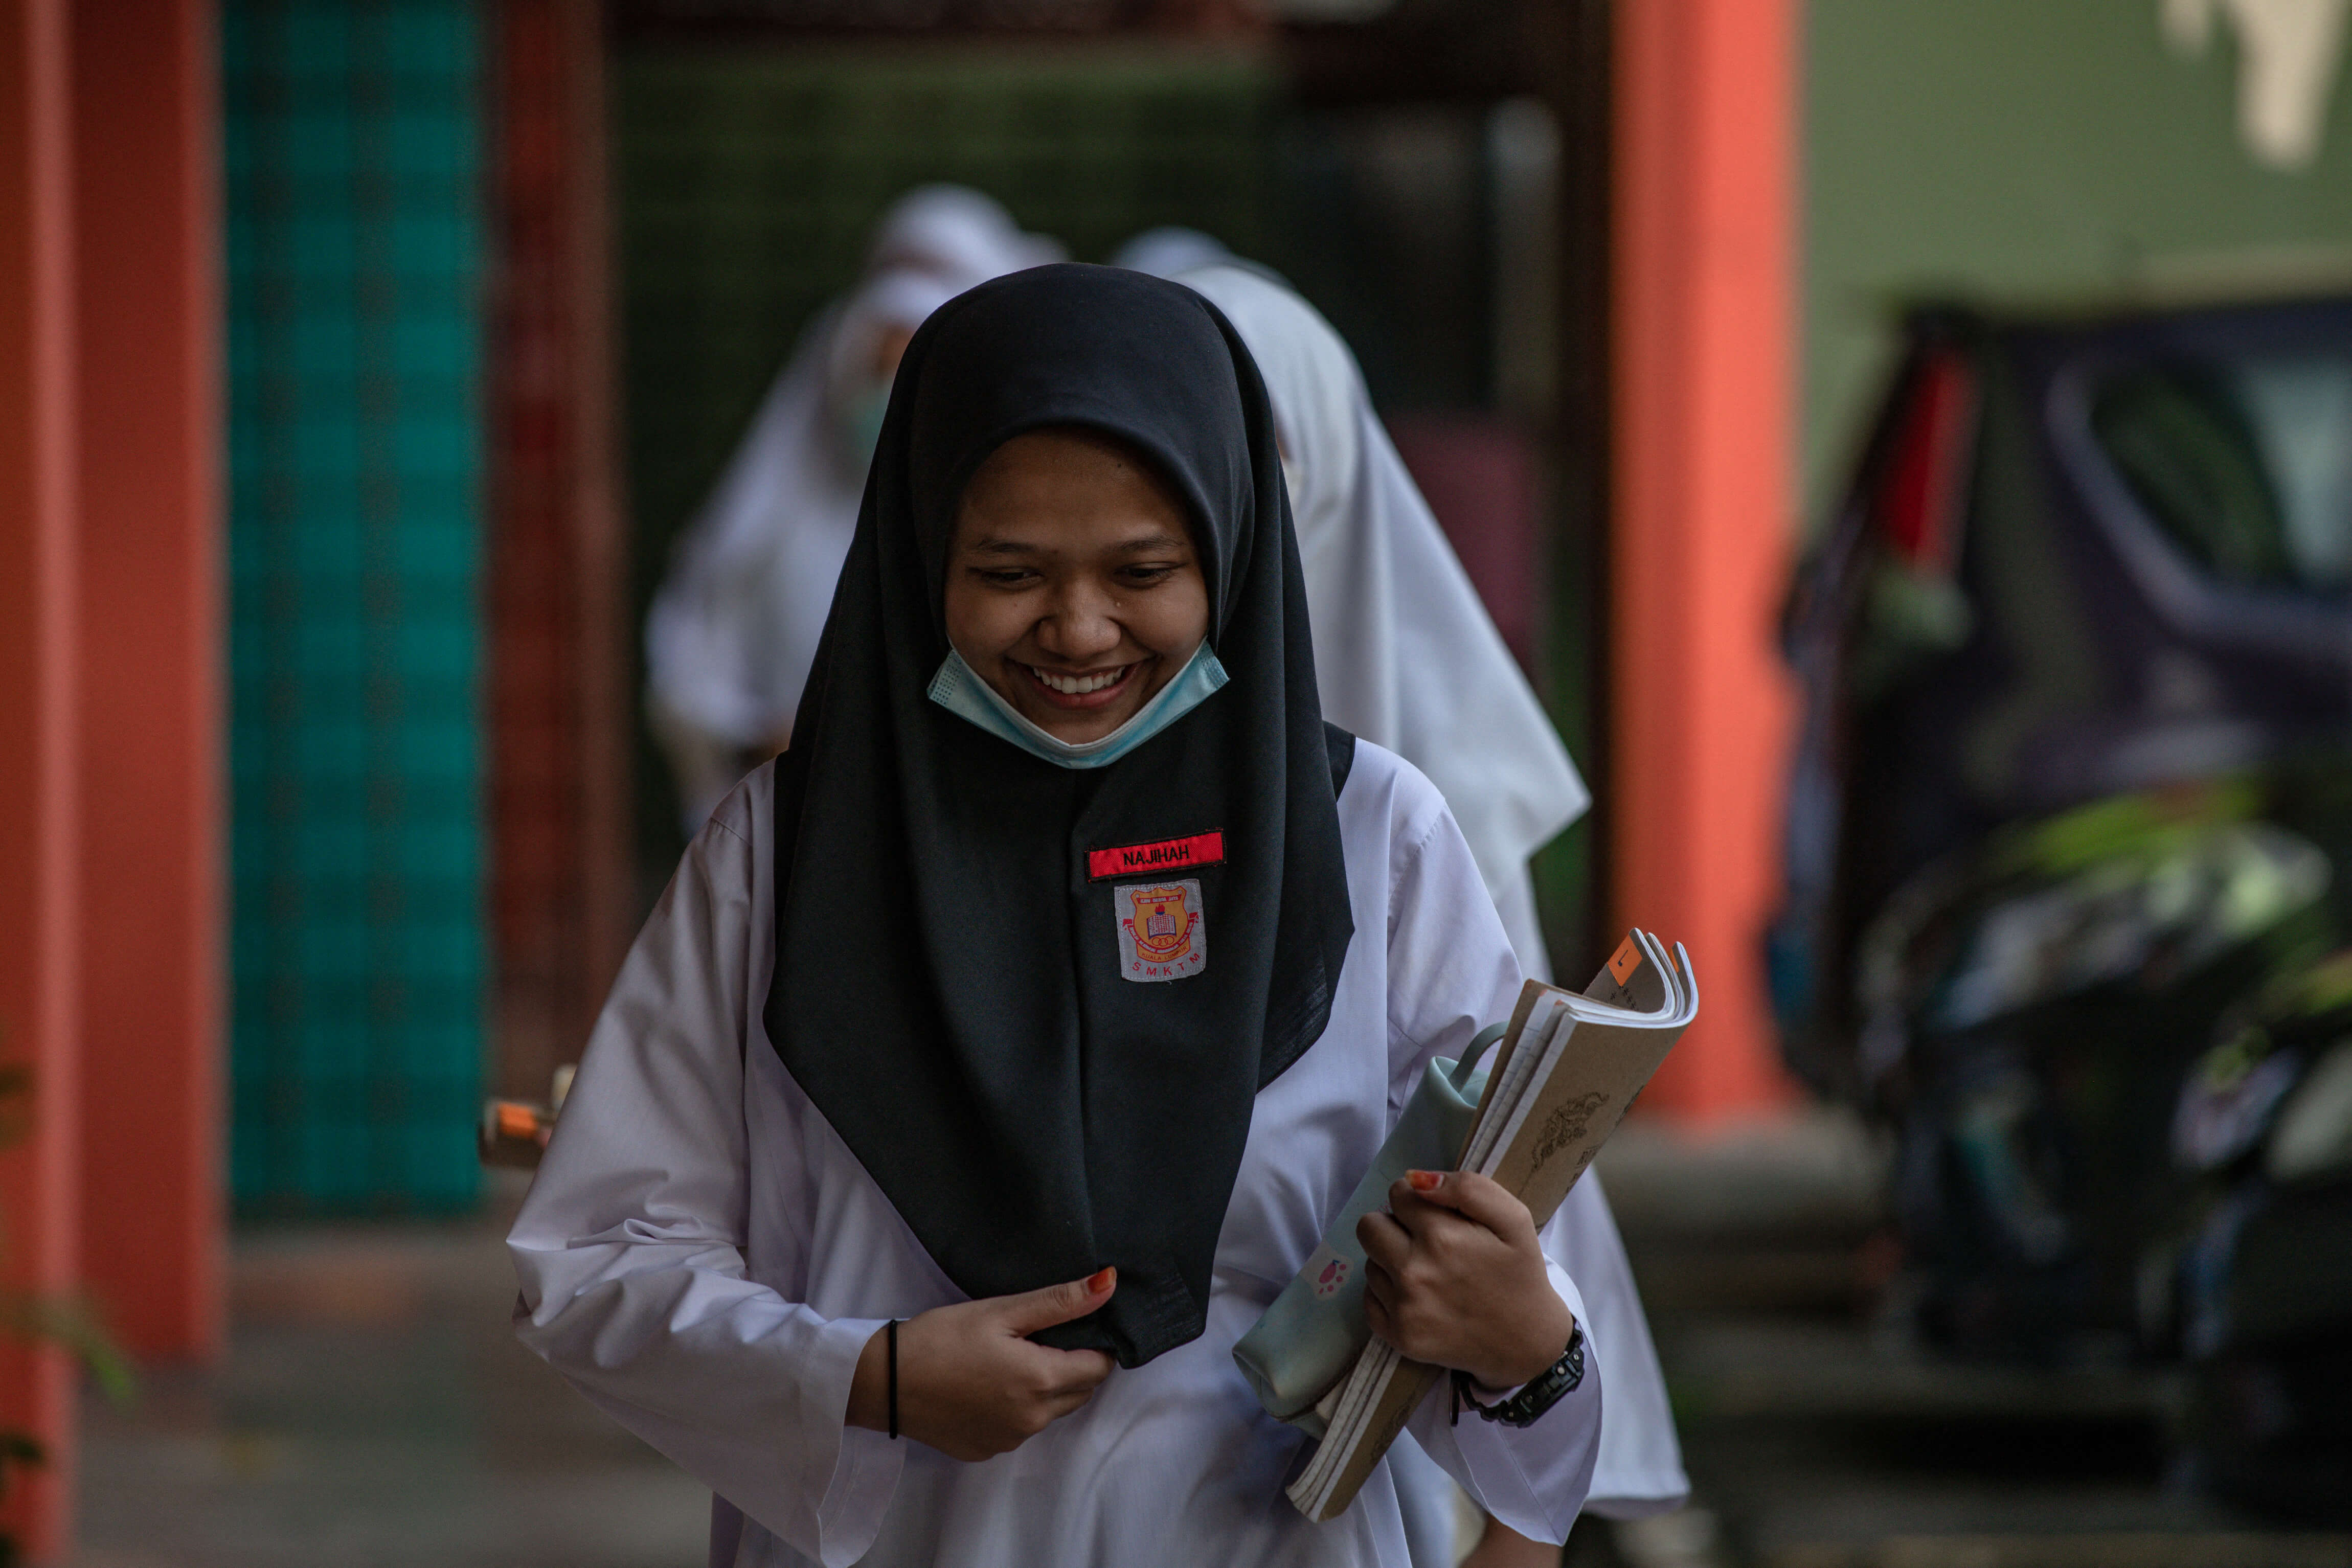 The COVID-19 pandemic has directly impacted Malaysian students' decisions in applying to universities, study shows.